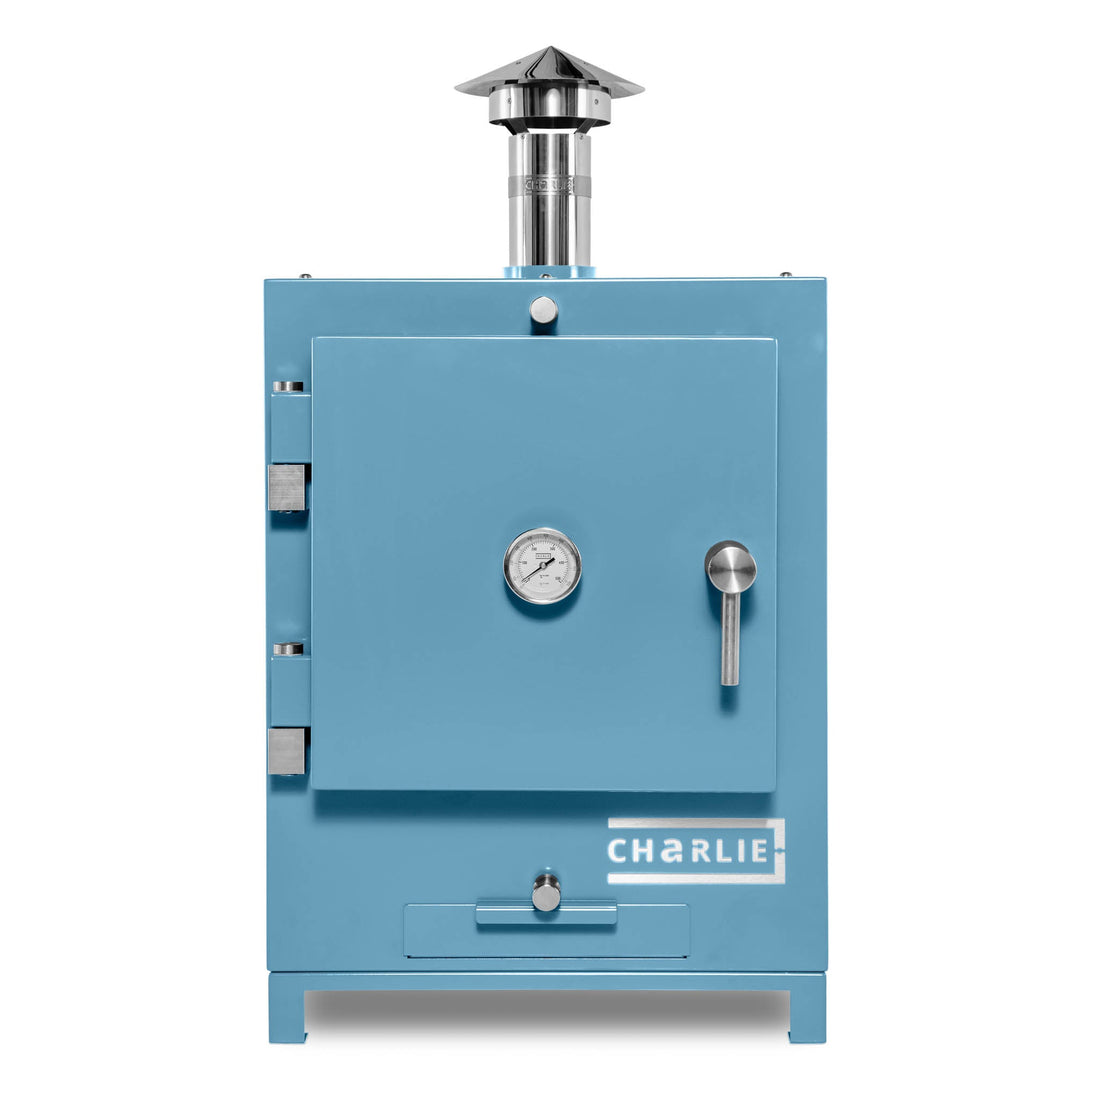 Cheeky Charlie Charcoal Tabletop Oven - Blue Marlin - Charlie Oven